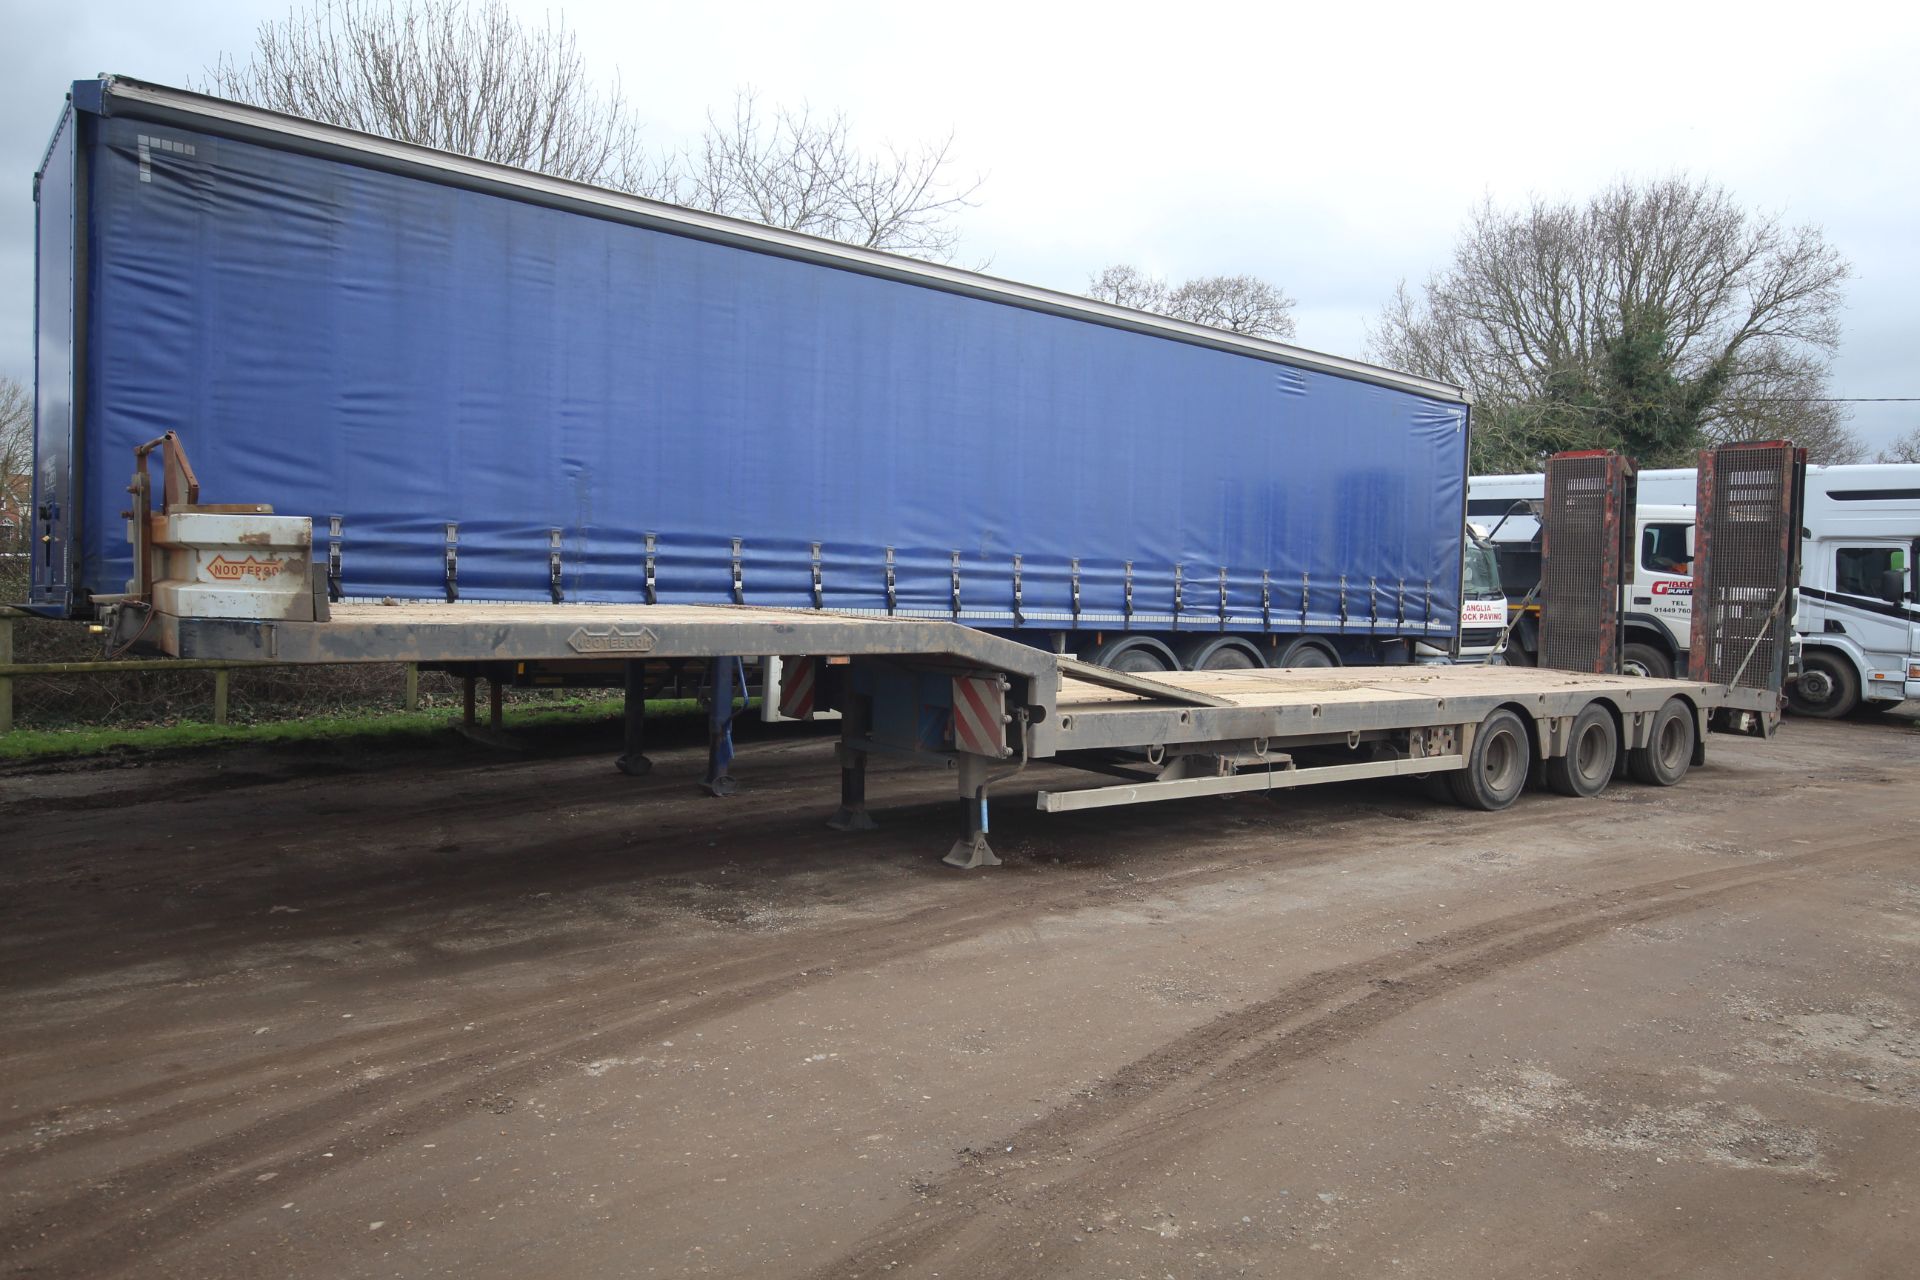 Nooteboom OSDS-41-03 38T 14.2m tri-axle low loader trailer. Registration C300731. Date of first